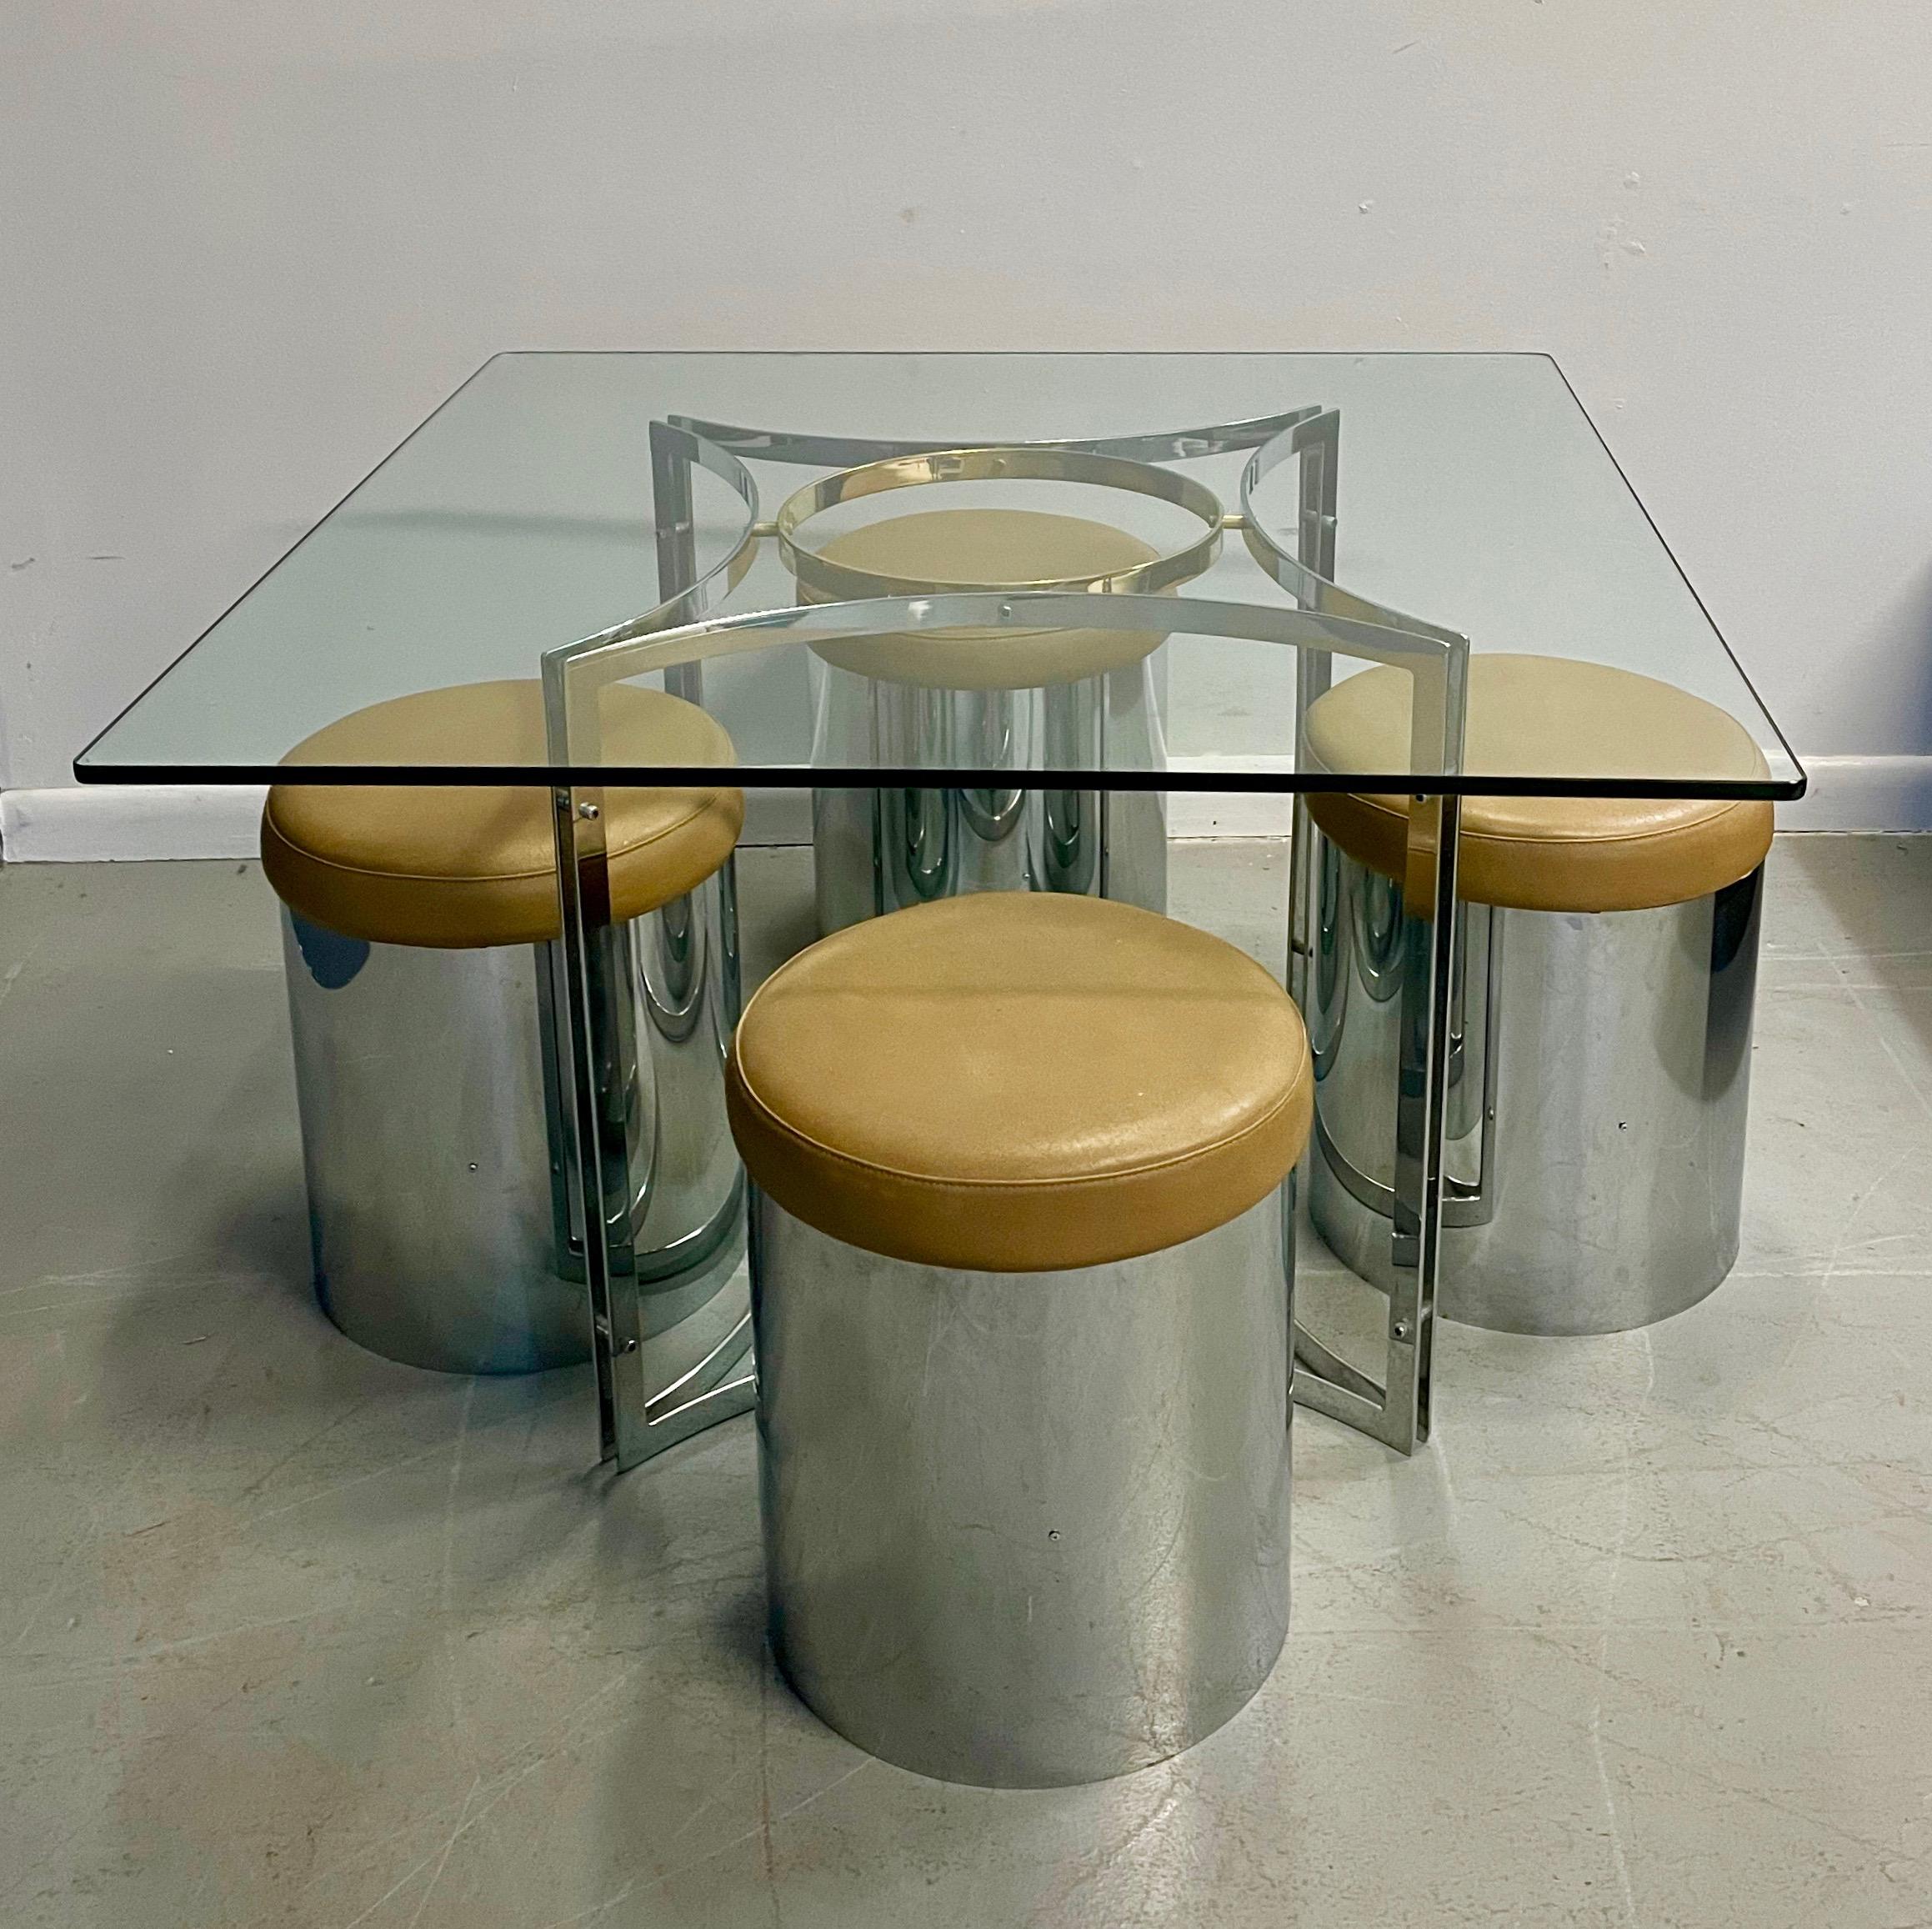 This brass and chrome set is the 1970s personified. A square piece of glass covers a chrome and brass base with four tan leather topped stainless steel round stools.